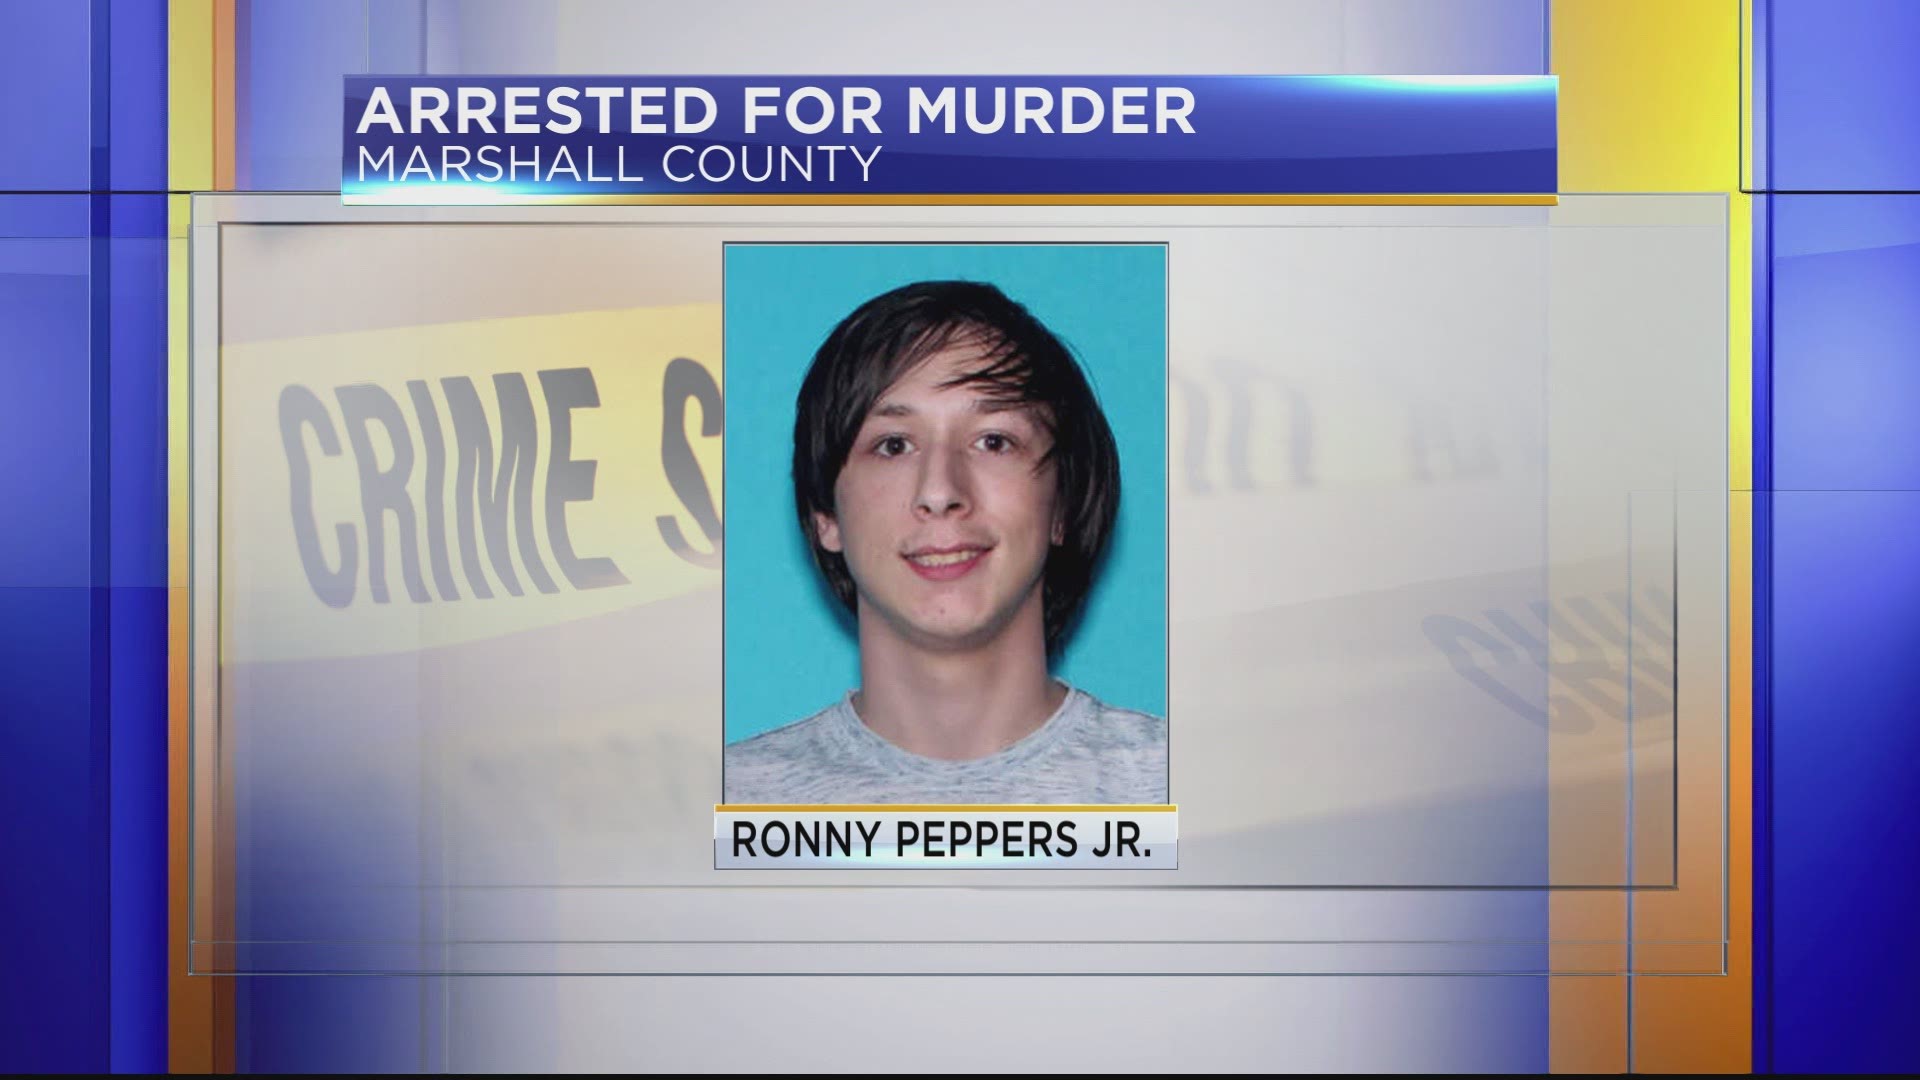 A suspect accused of stabbing and murdering a man in the Asbury community of Marshall County is in custody at the Marshall County Jail.